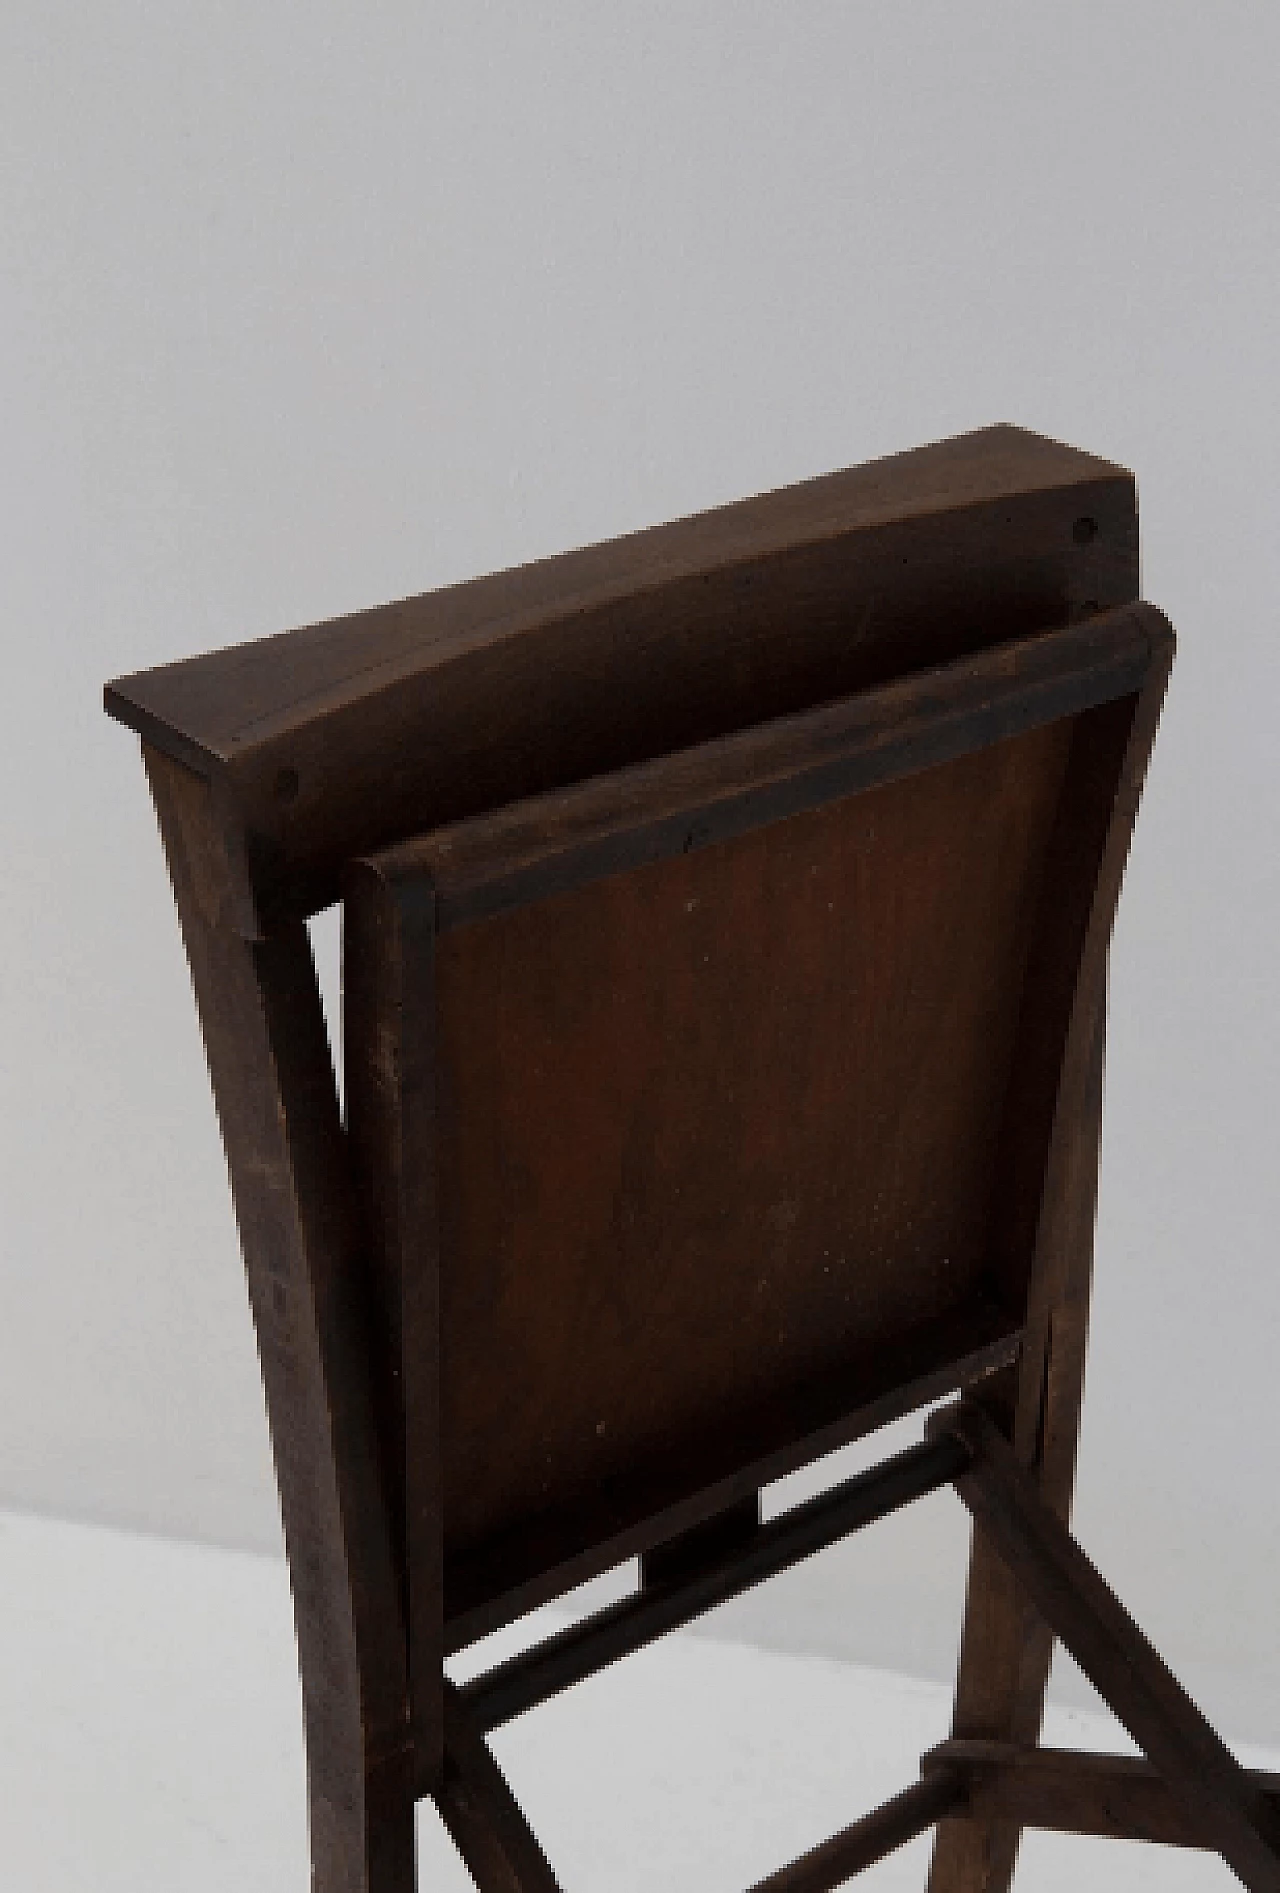 4 Ecclesiastical chairs with kneeling-stool by Caloi, 1930s 11